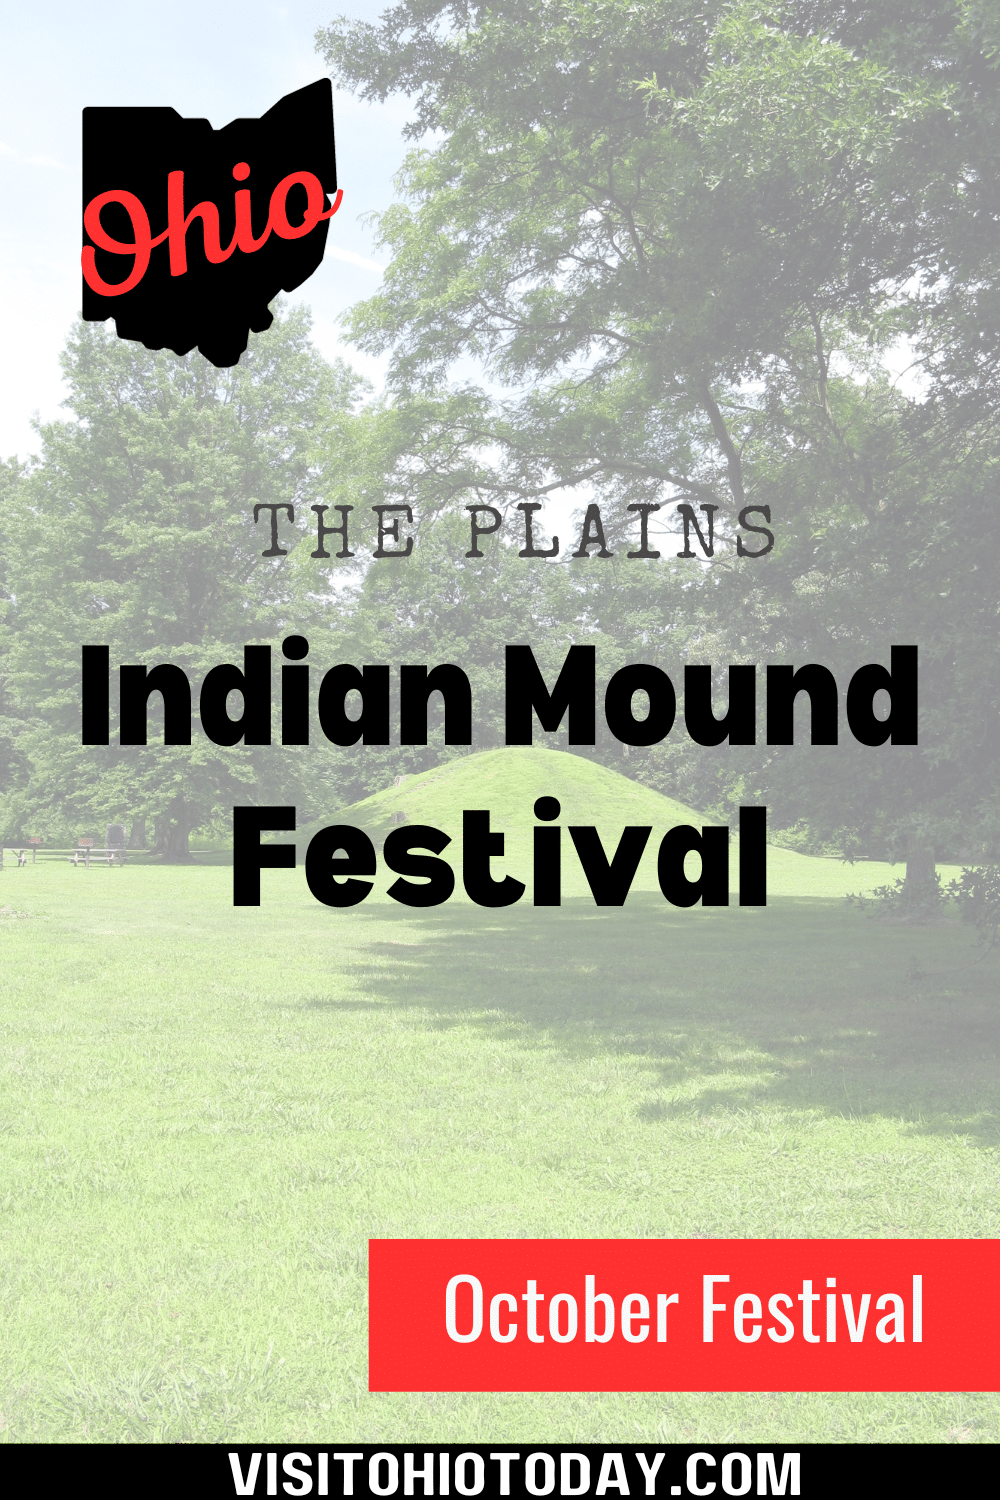 Mark your calendars, The Plains Indian Mound Festival is back, and it's happening on October 6th, 7th, and 8th, 2023, at the scenic The Plains Community Park in The Plains, Ohio.